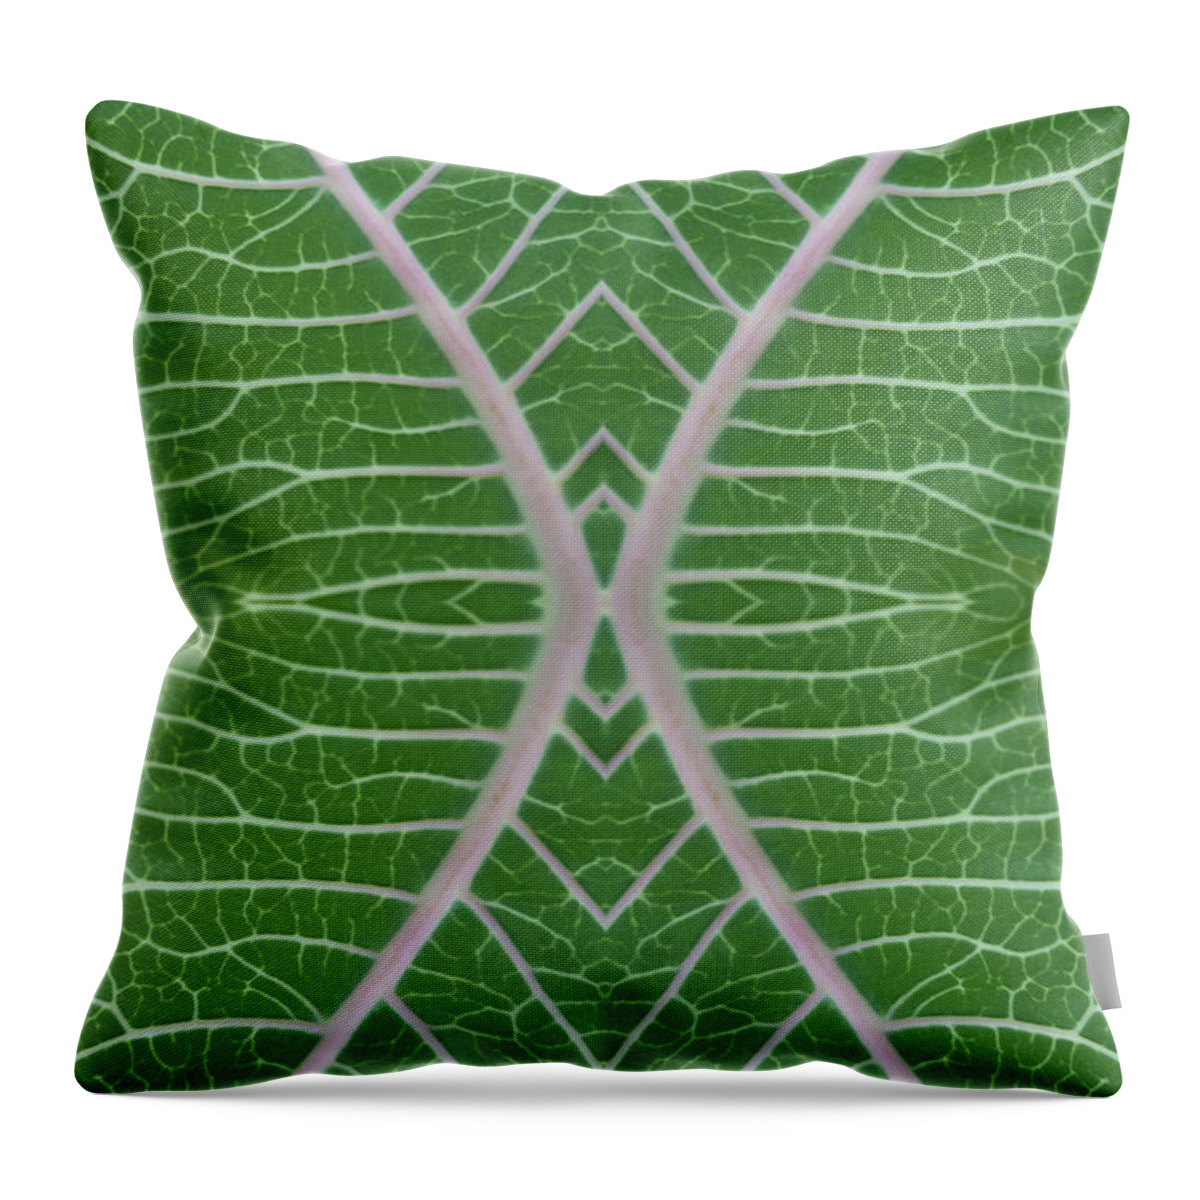 Photographic Art Throw Pillow featuring the photograph Milkweed Veins Quad by Paul Rebmann